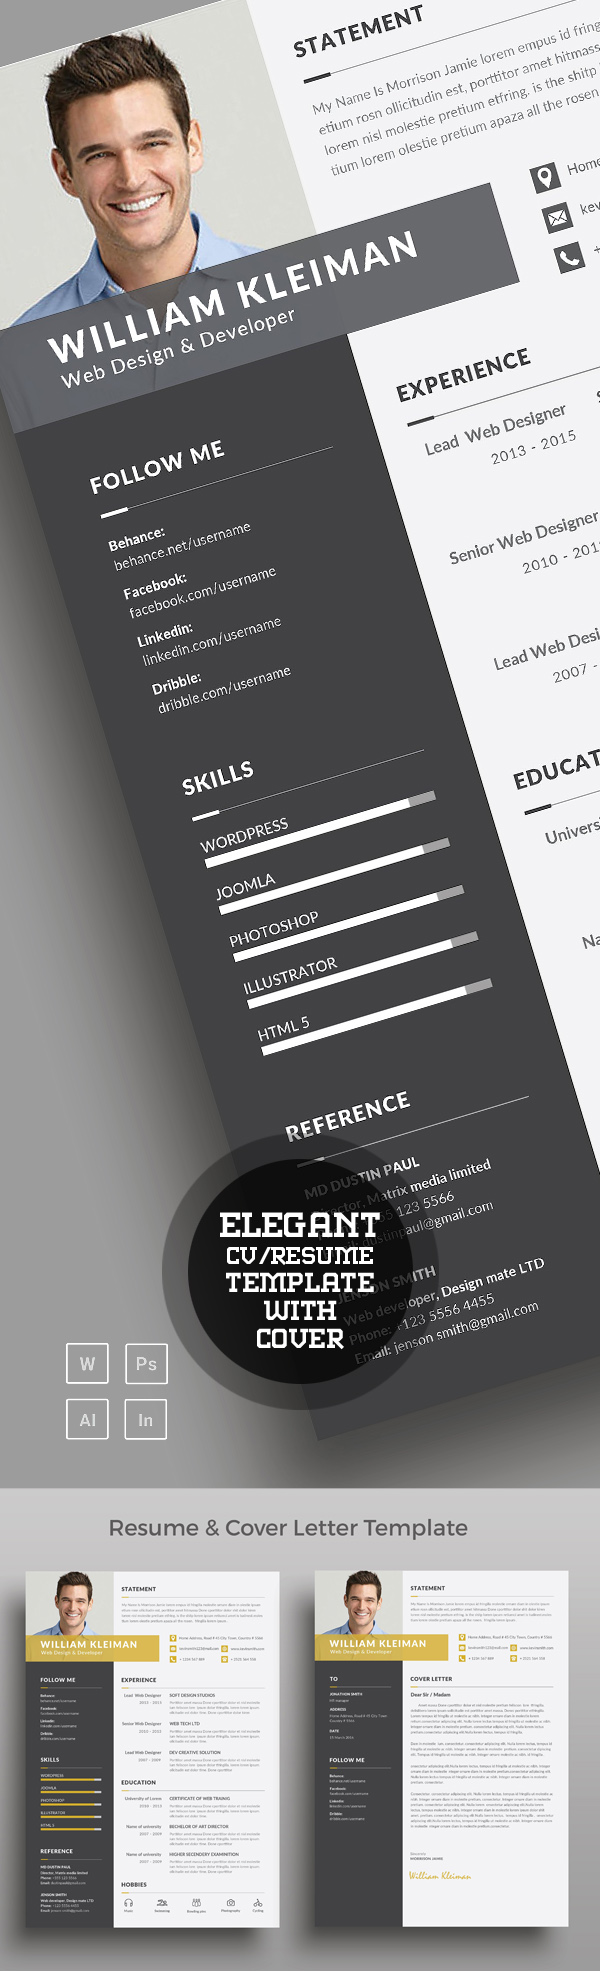 50 Best Resume Templates For 2018 - 22